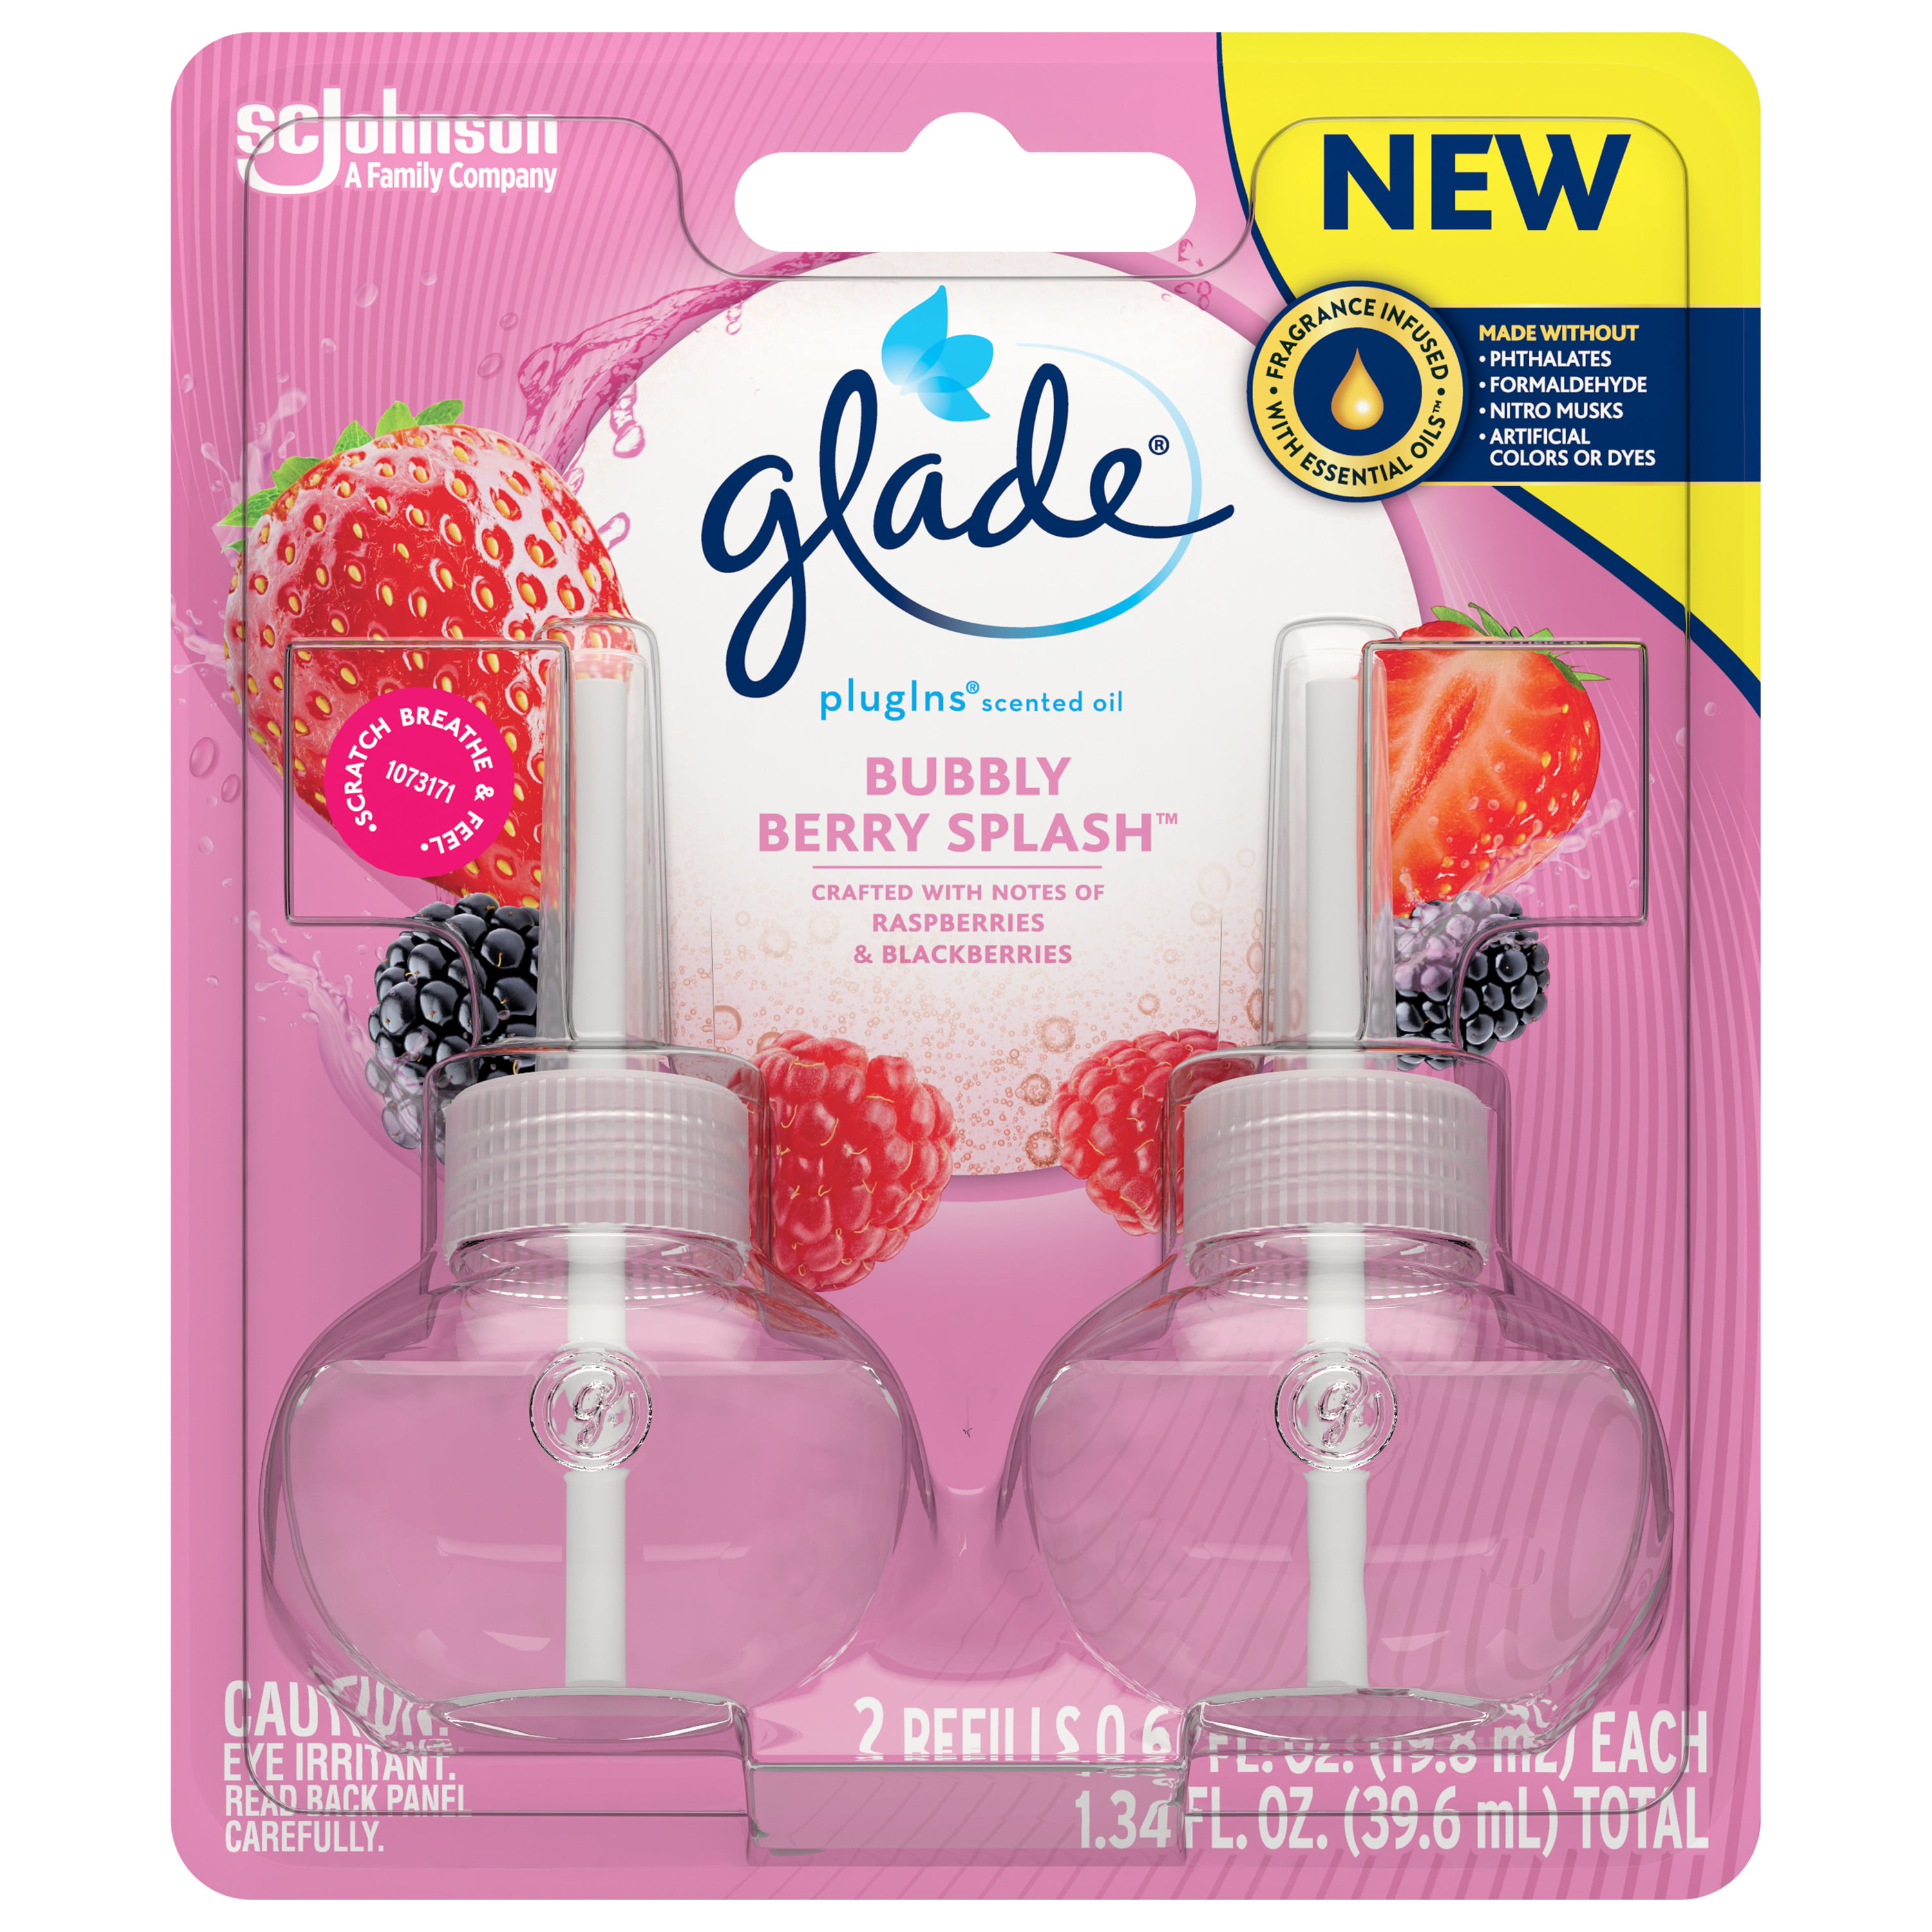 Glade PlugIns Scented Oil Diffuser, Bubbly Berry Splash, 2 Refills, 1.